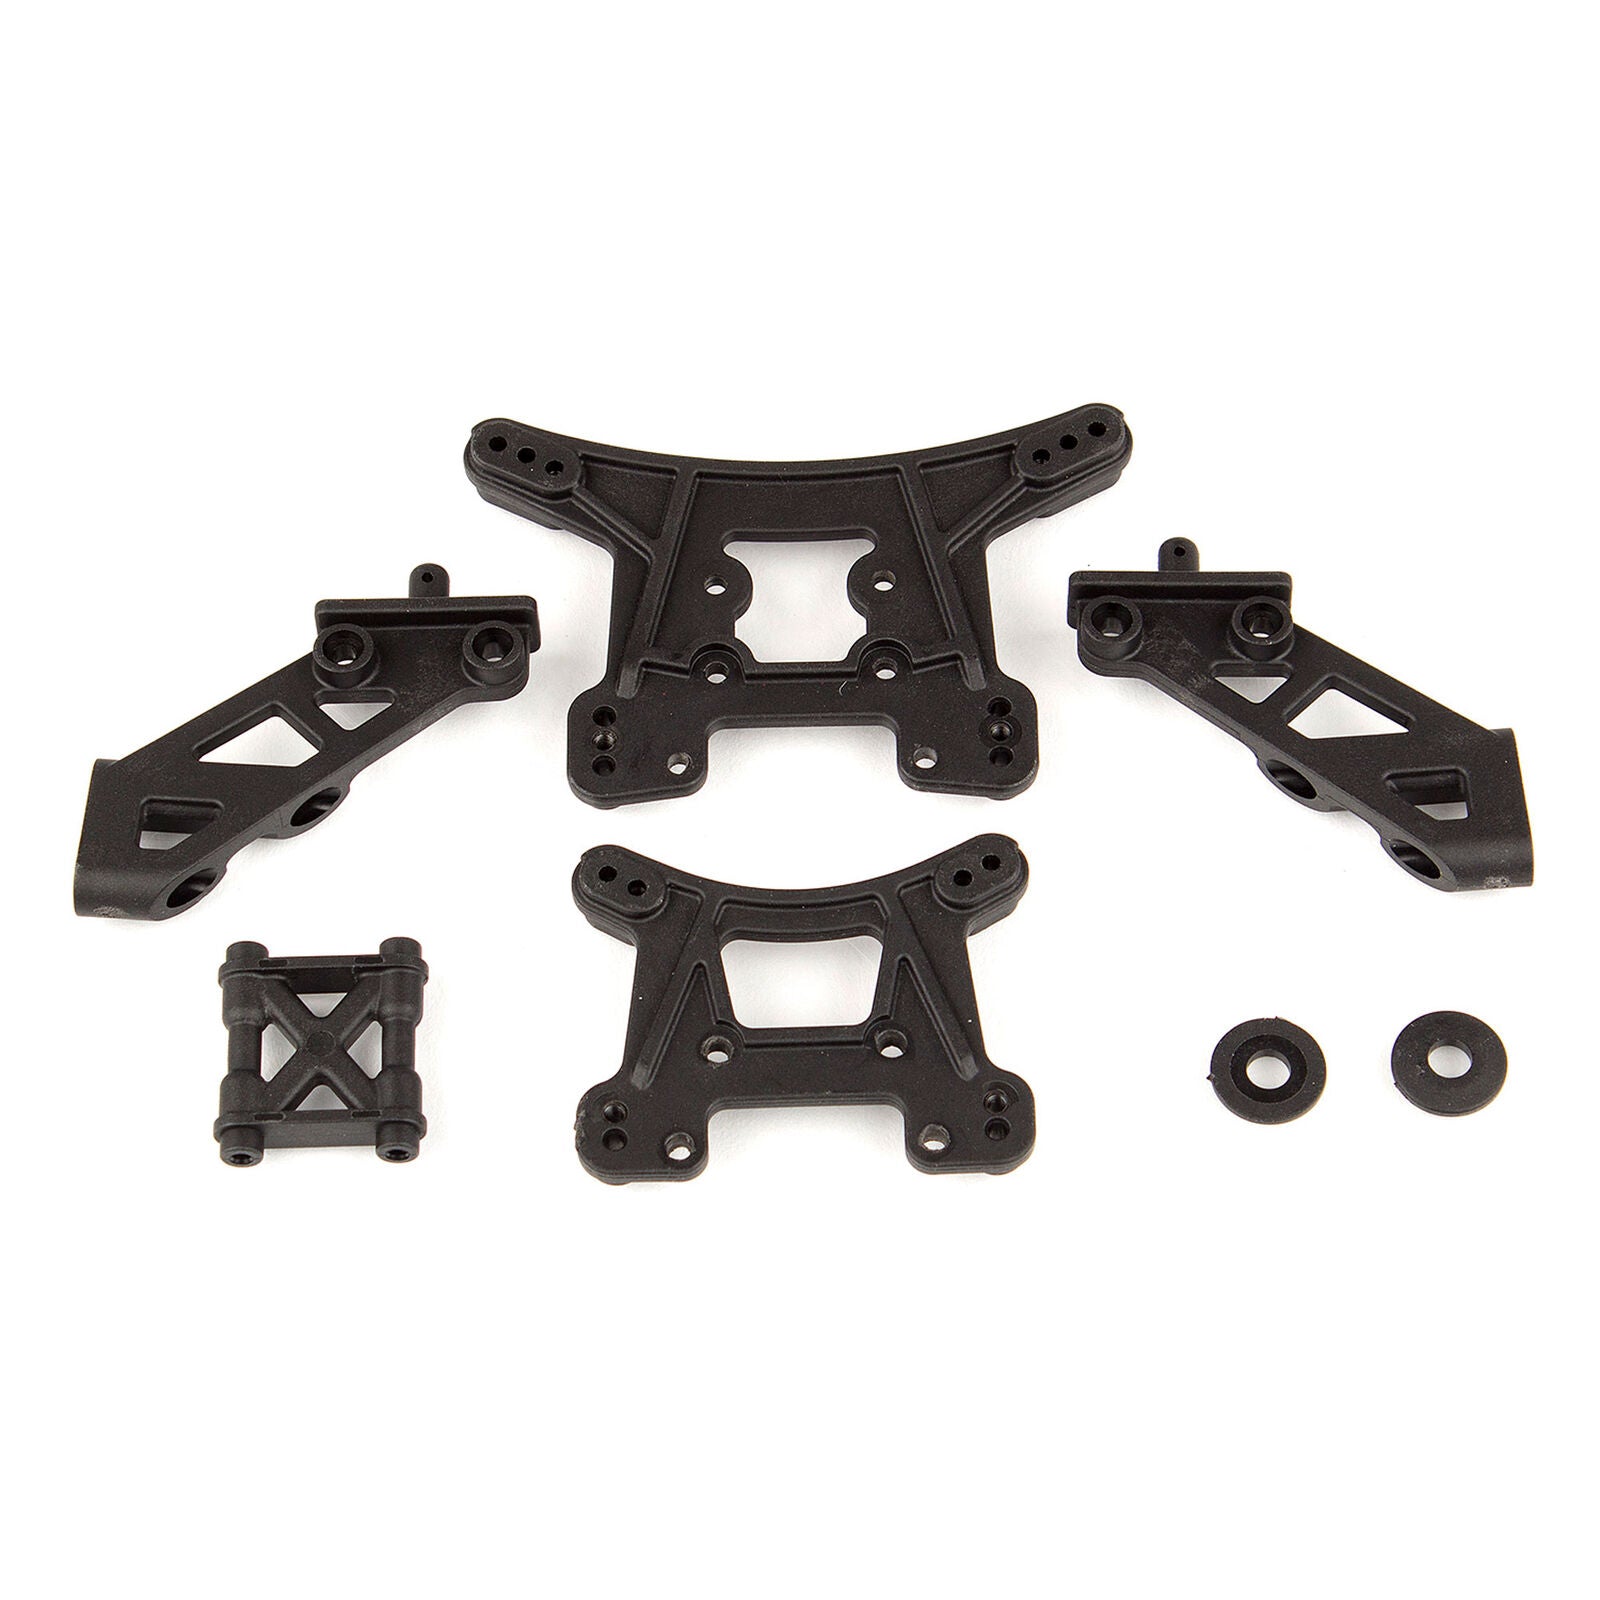 ASSOCIATED 21503 Front and Rear Shock Towers & Wing Mounts: 14B, 14T